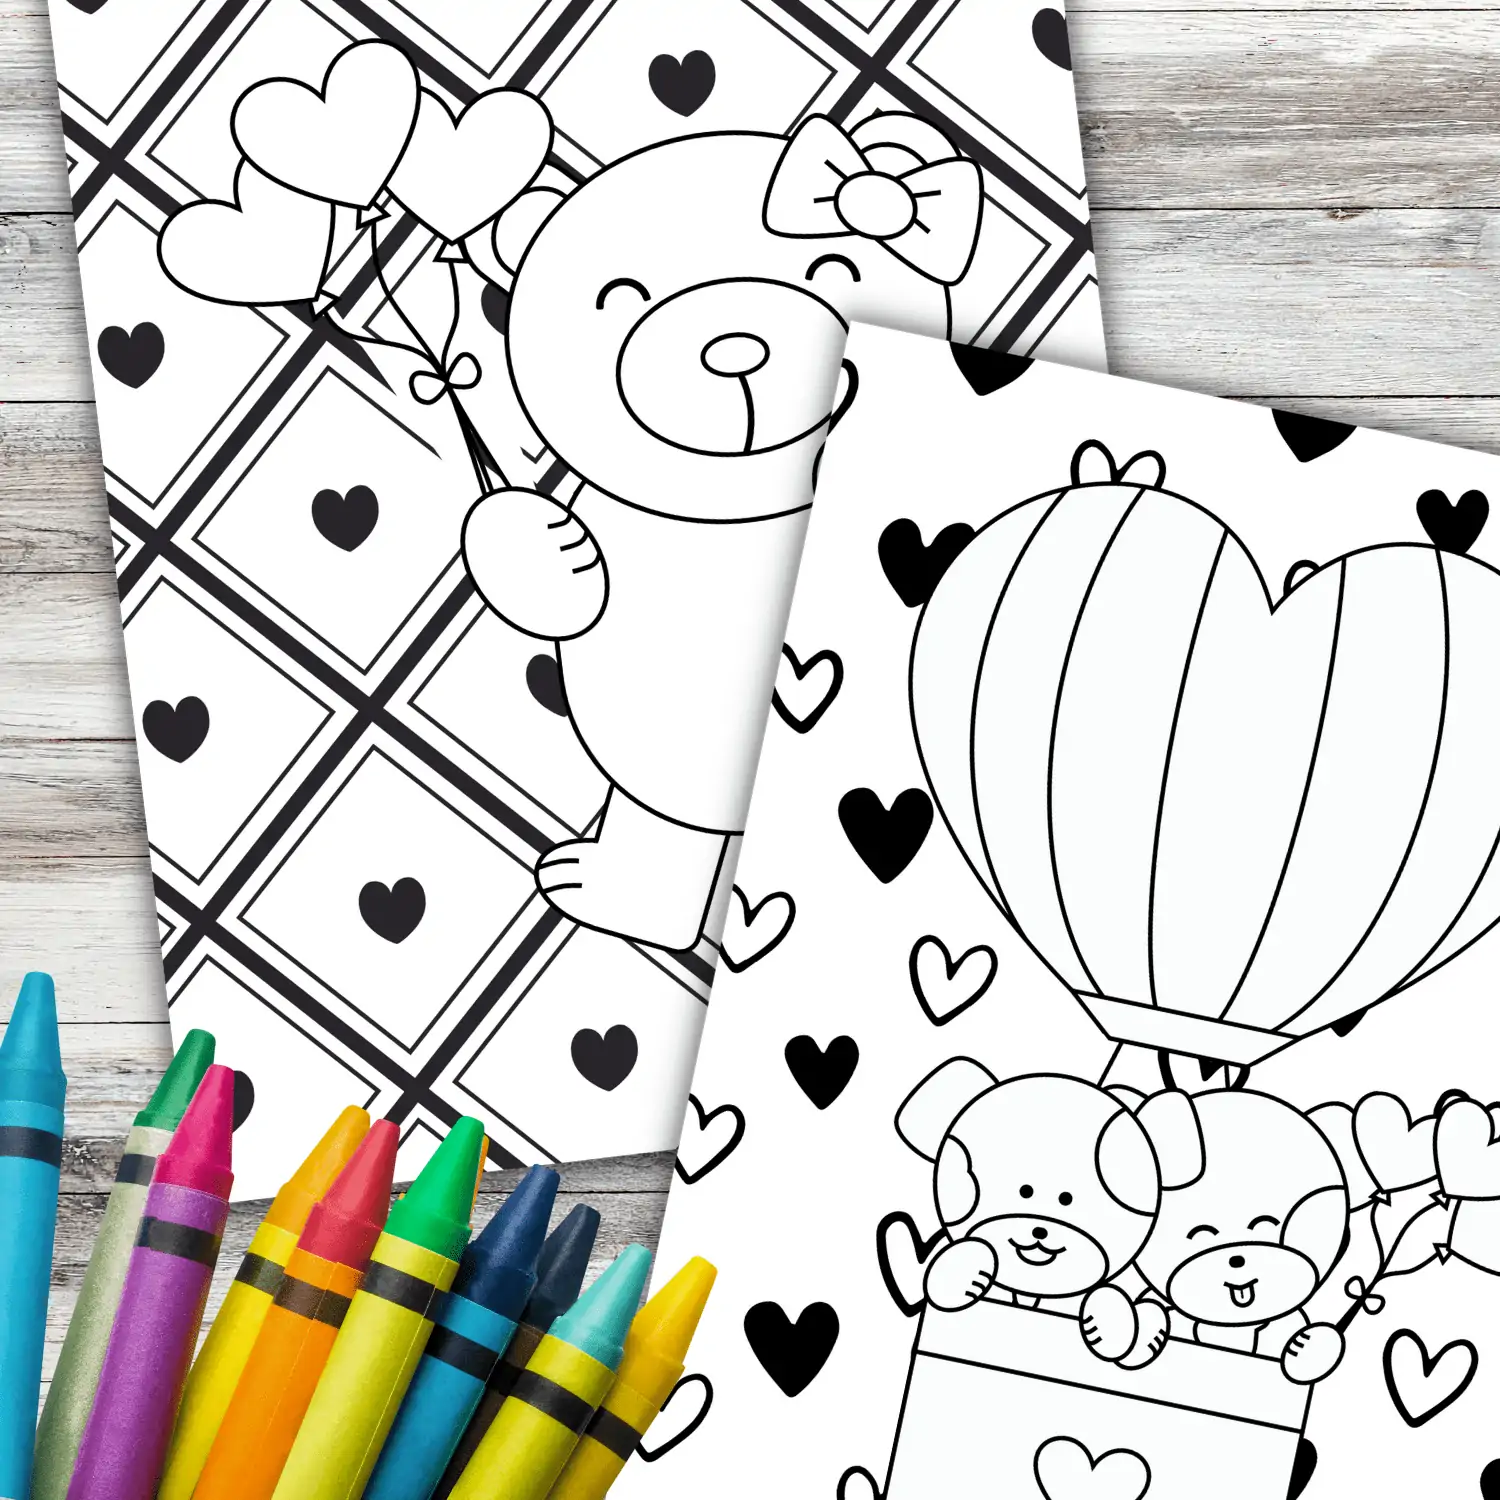 Valentines coloring pages for kids free â in the bag kids crafts